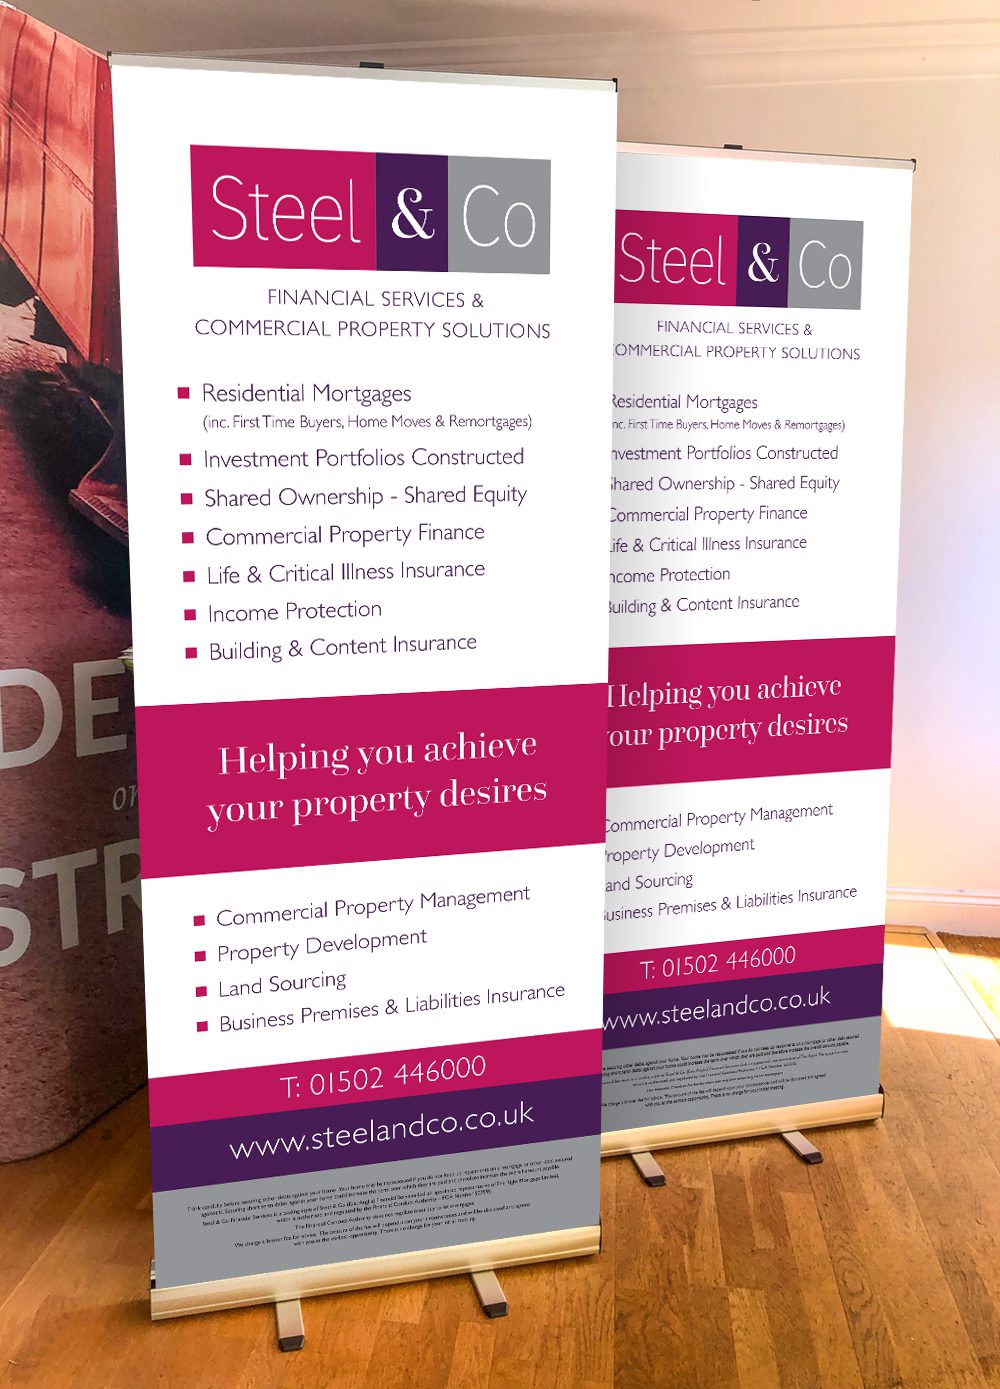 There’s nothing as quick to erect as a roller banner!